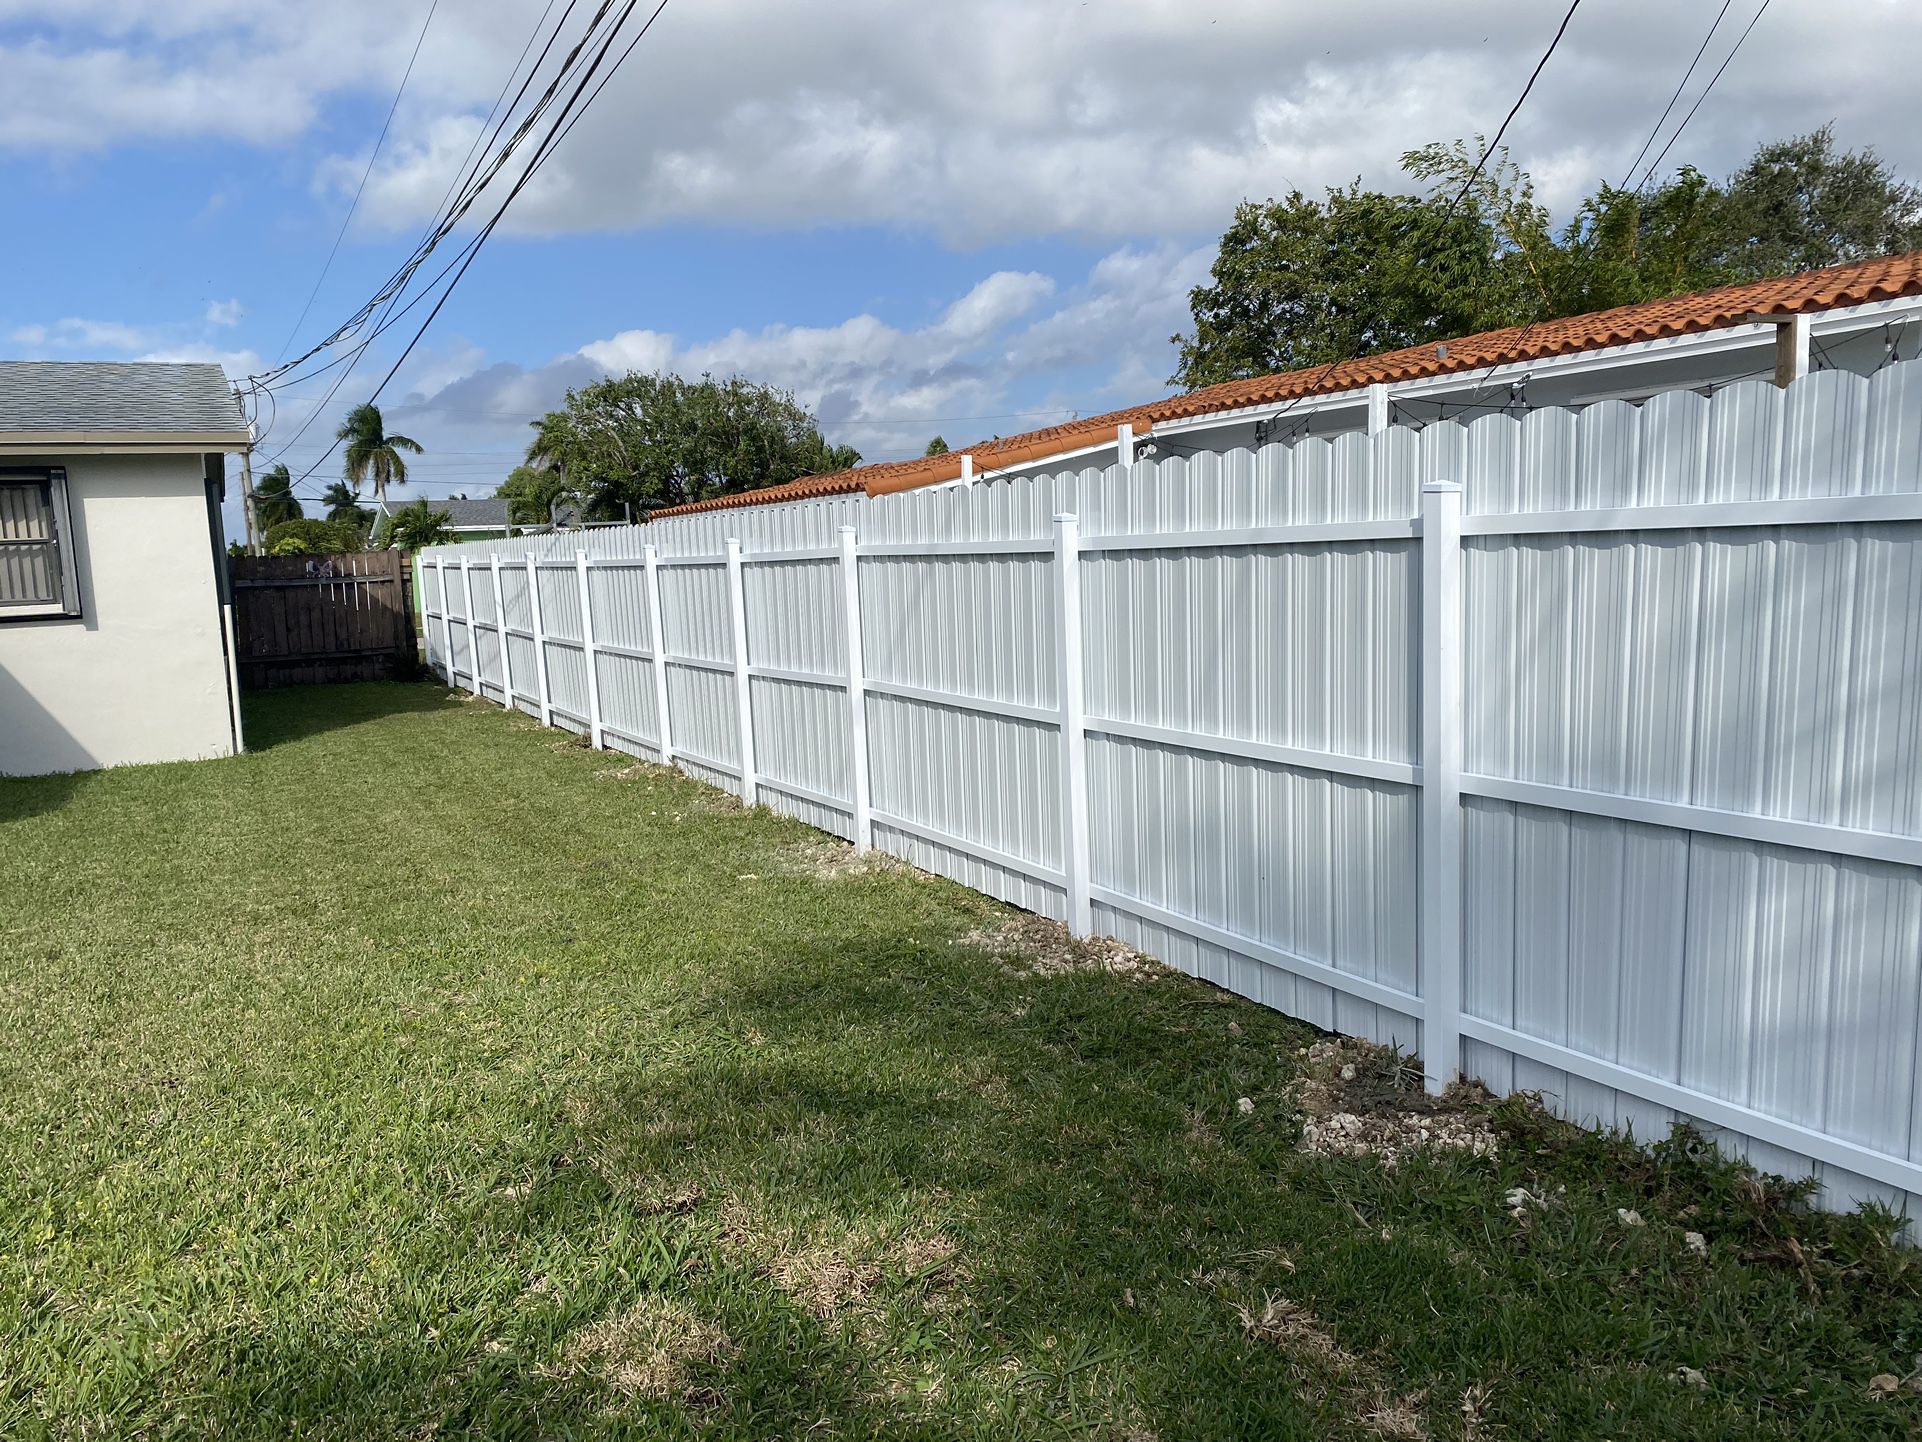 Fence 20 Pies lineales 